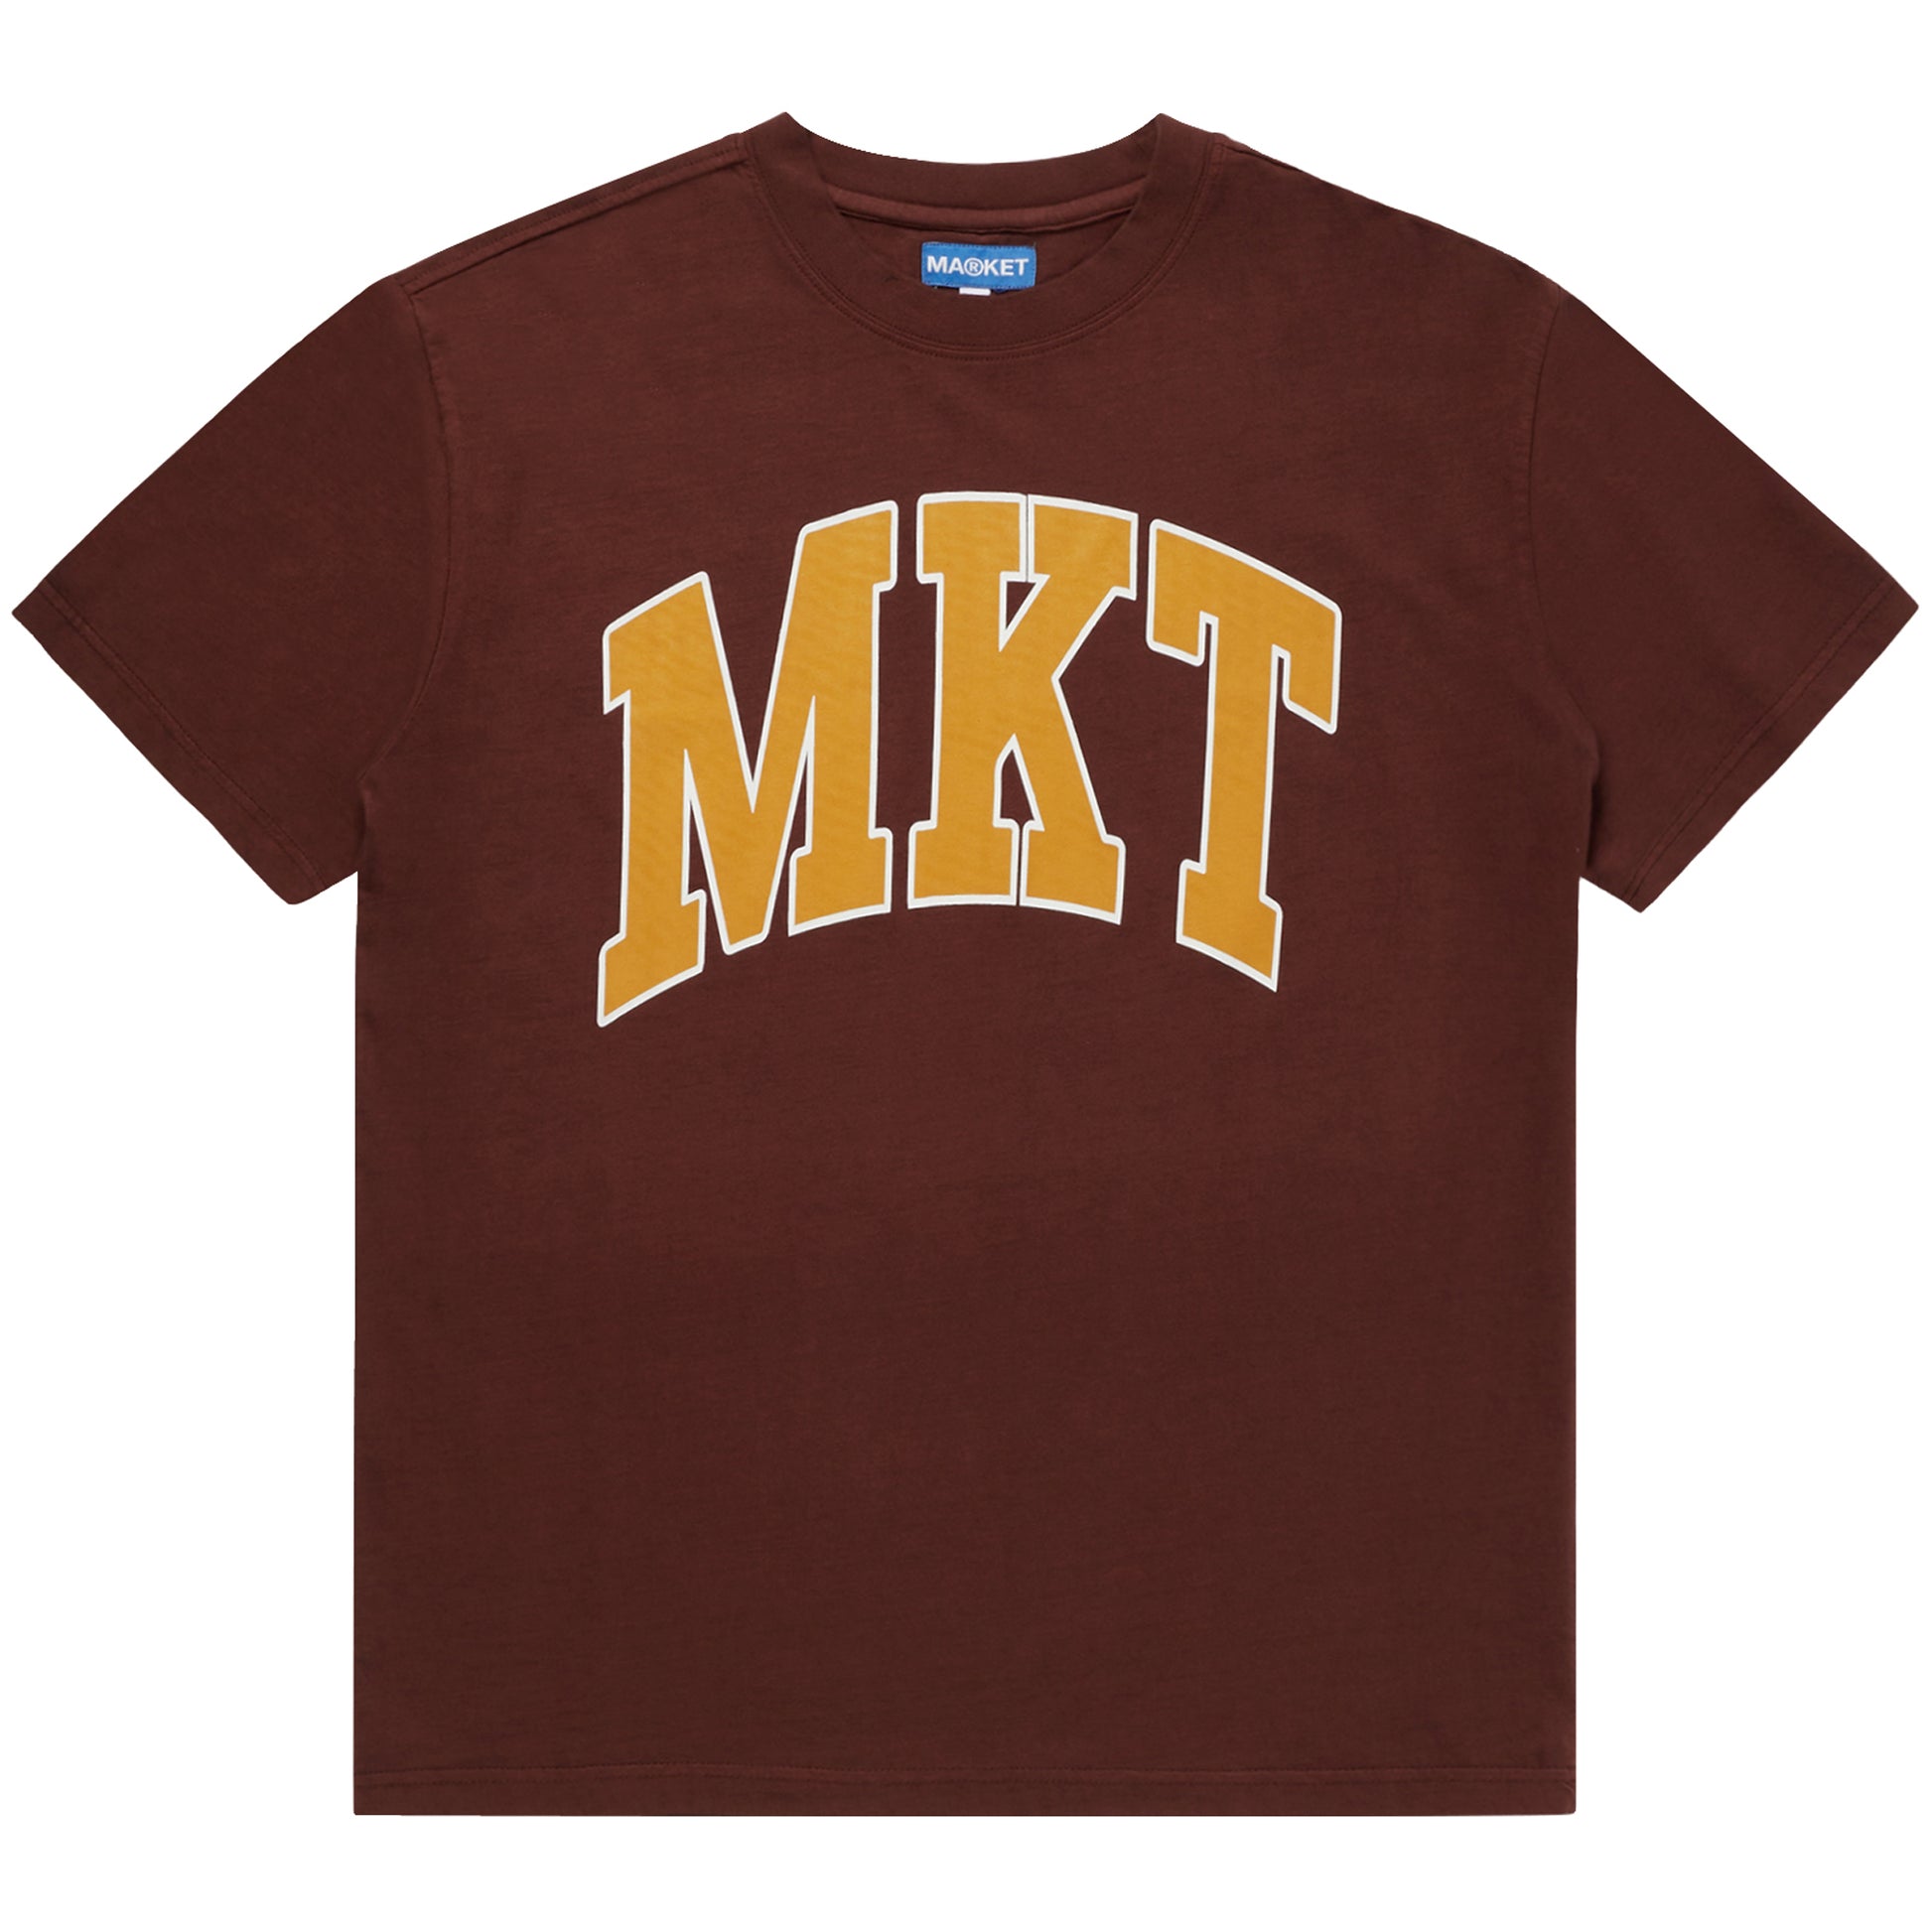 Market streetwear brand graphic t-shirt in brown with MKT logo in collegiate font